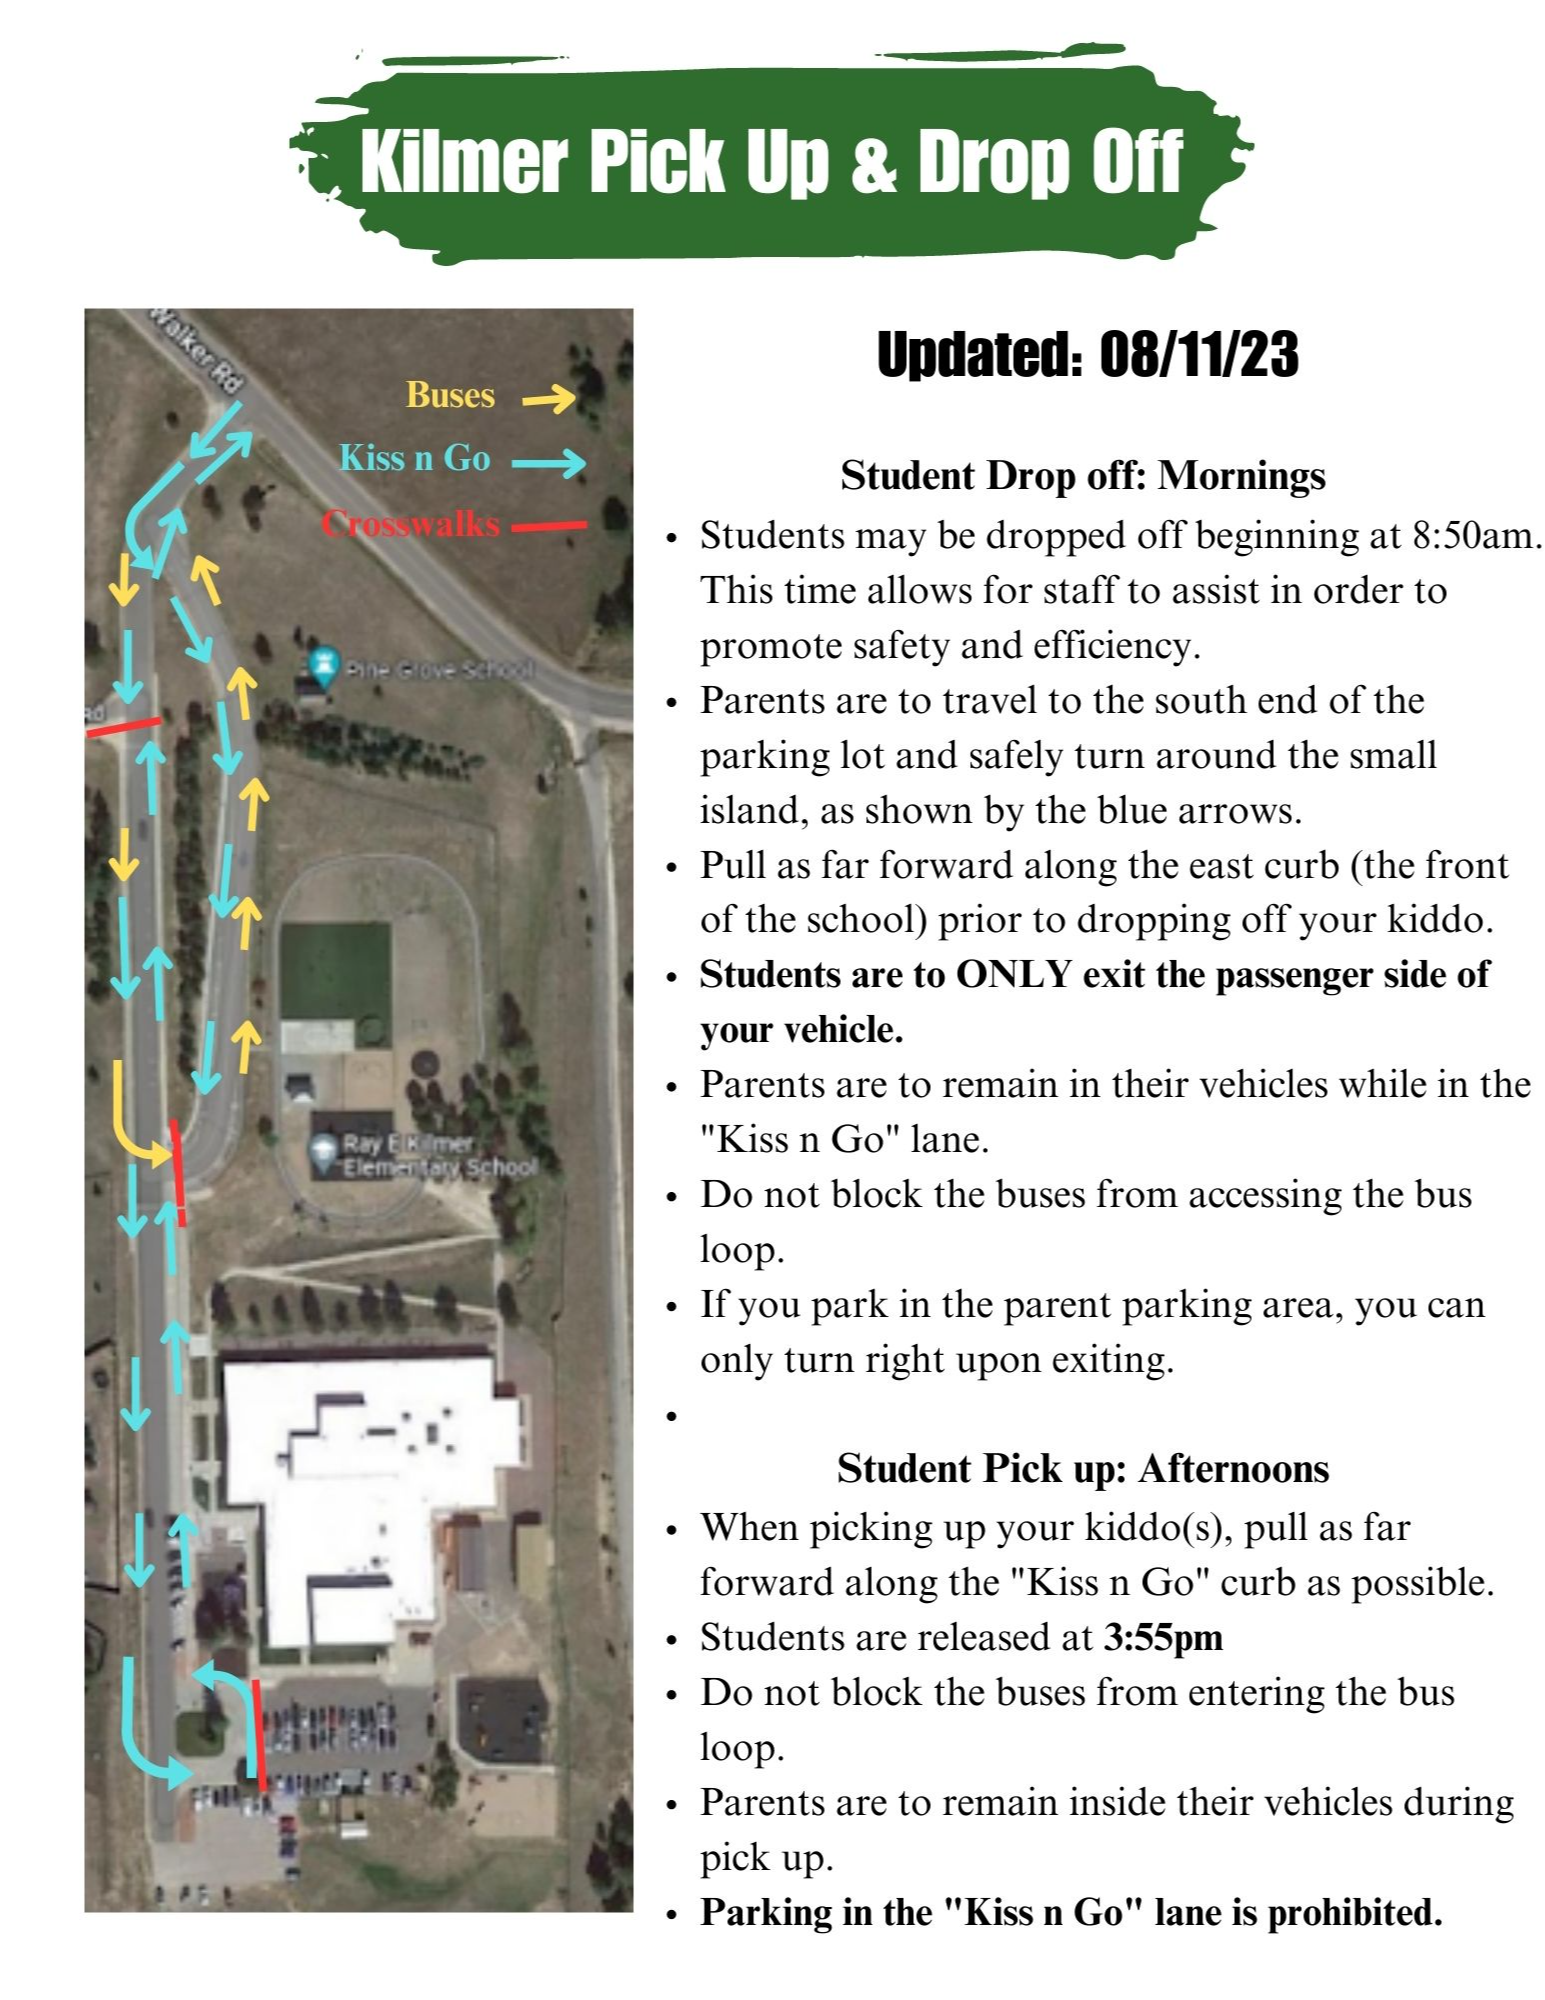 Drop Off and Pick Up Procedures instructions and map